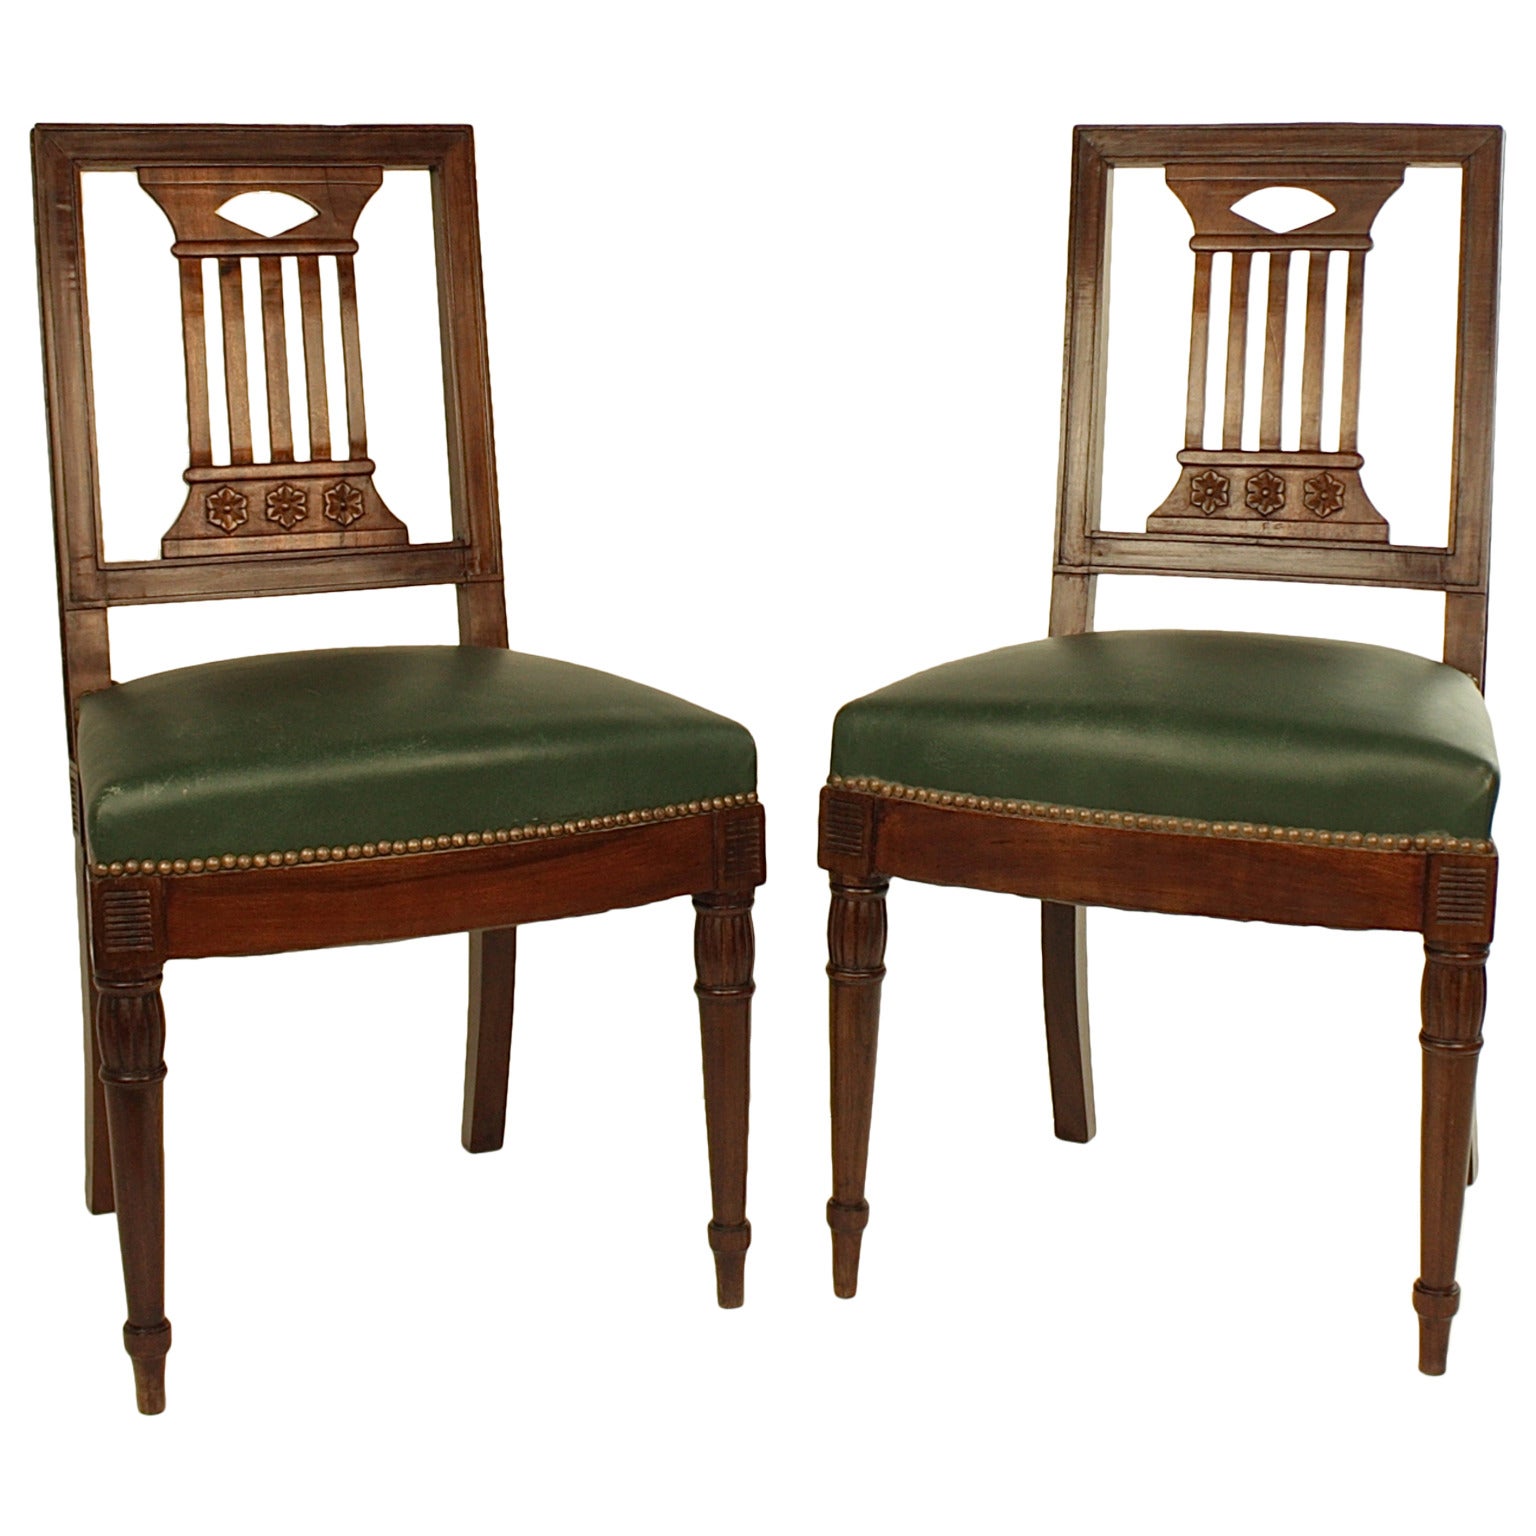 Pair of Early 19th Century Directoire Chairs, in the manner of Bellange Frères